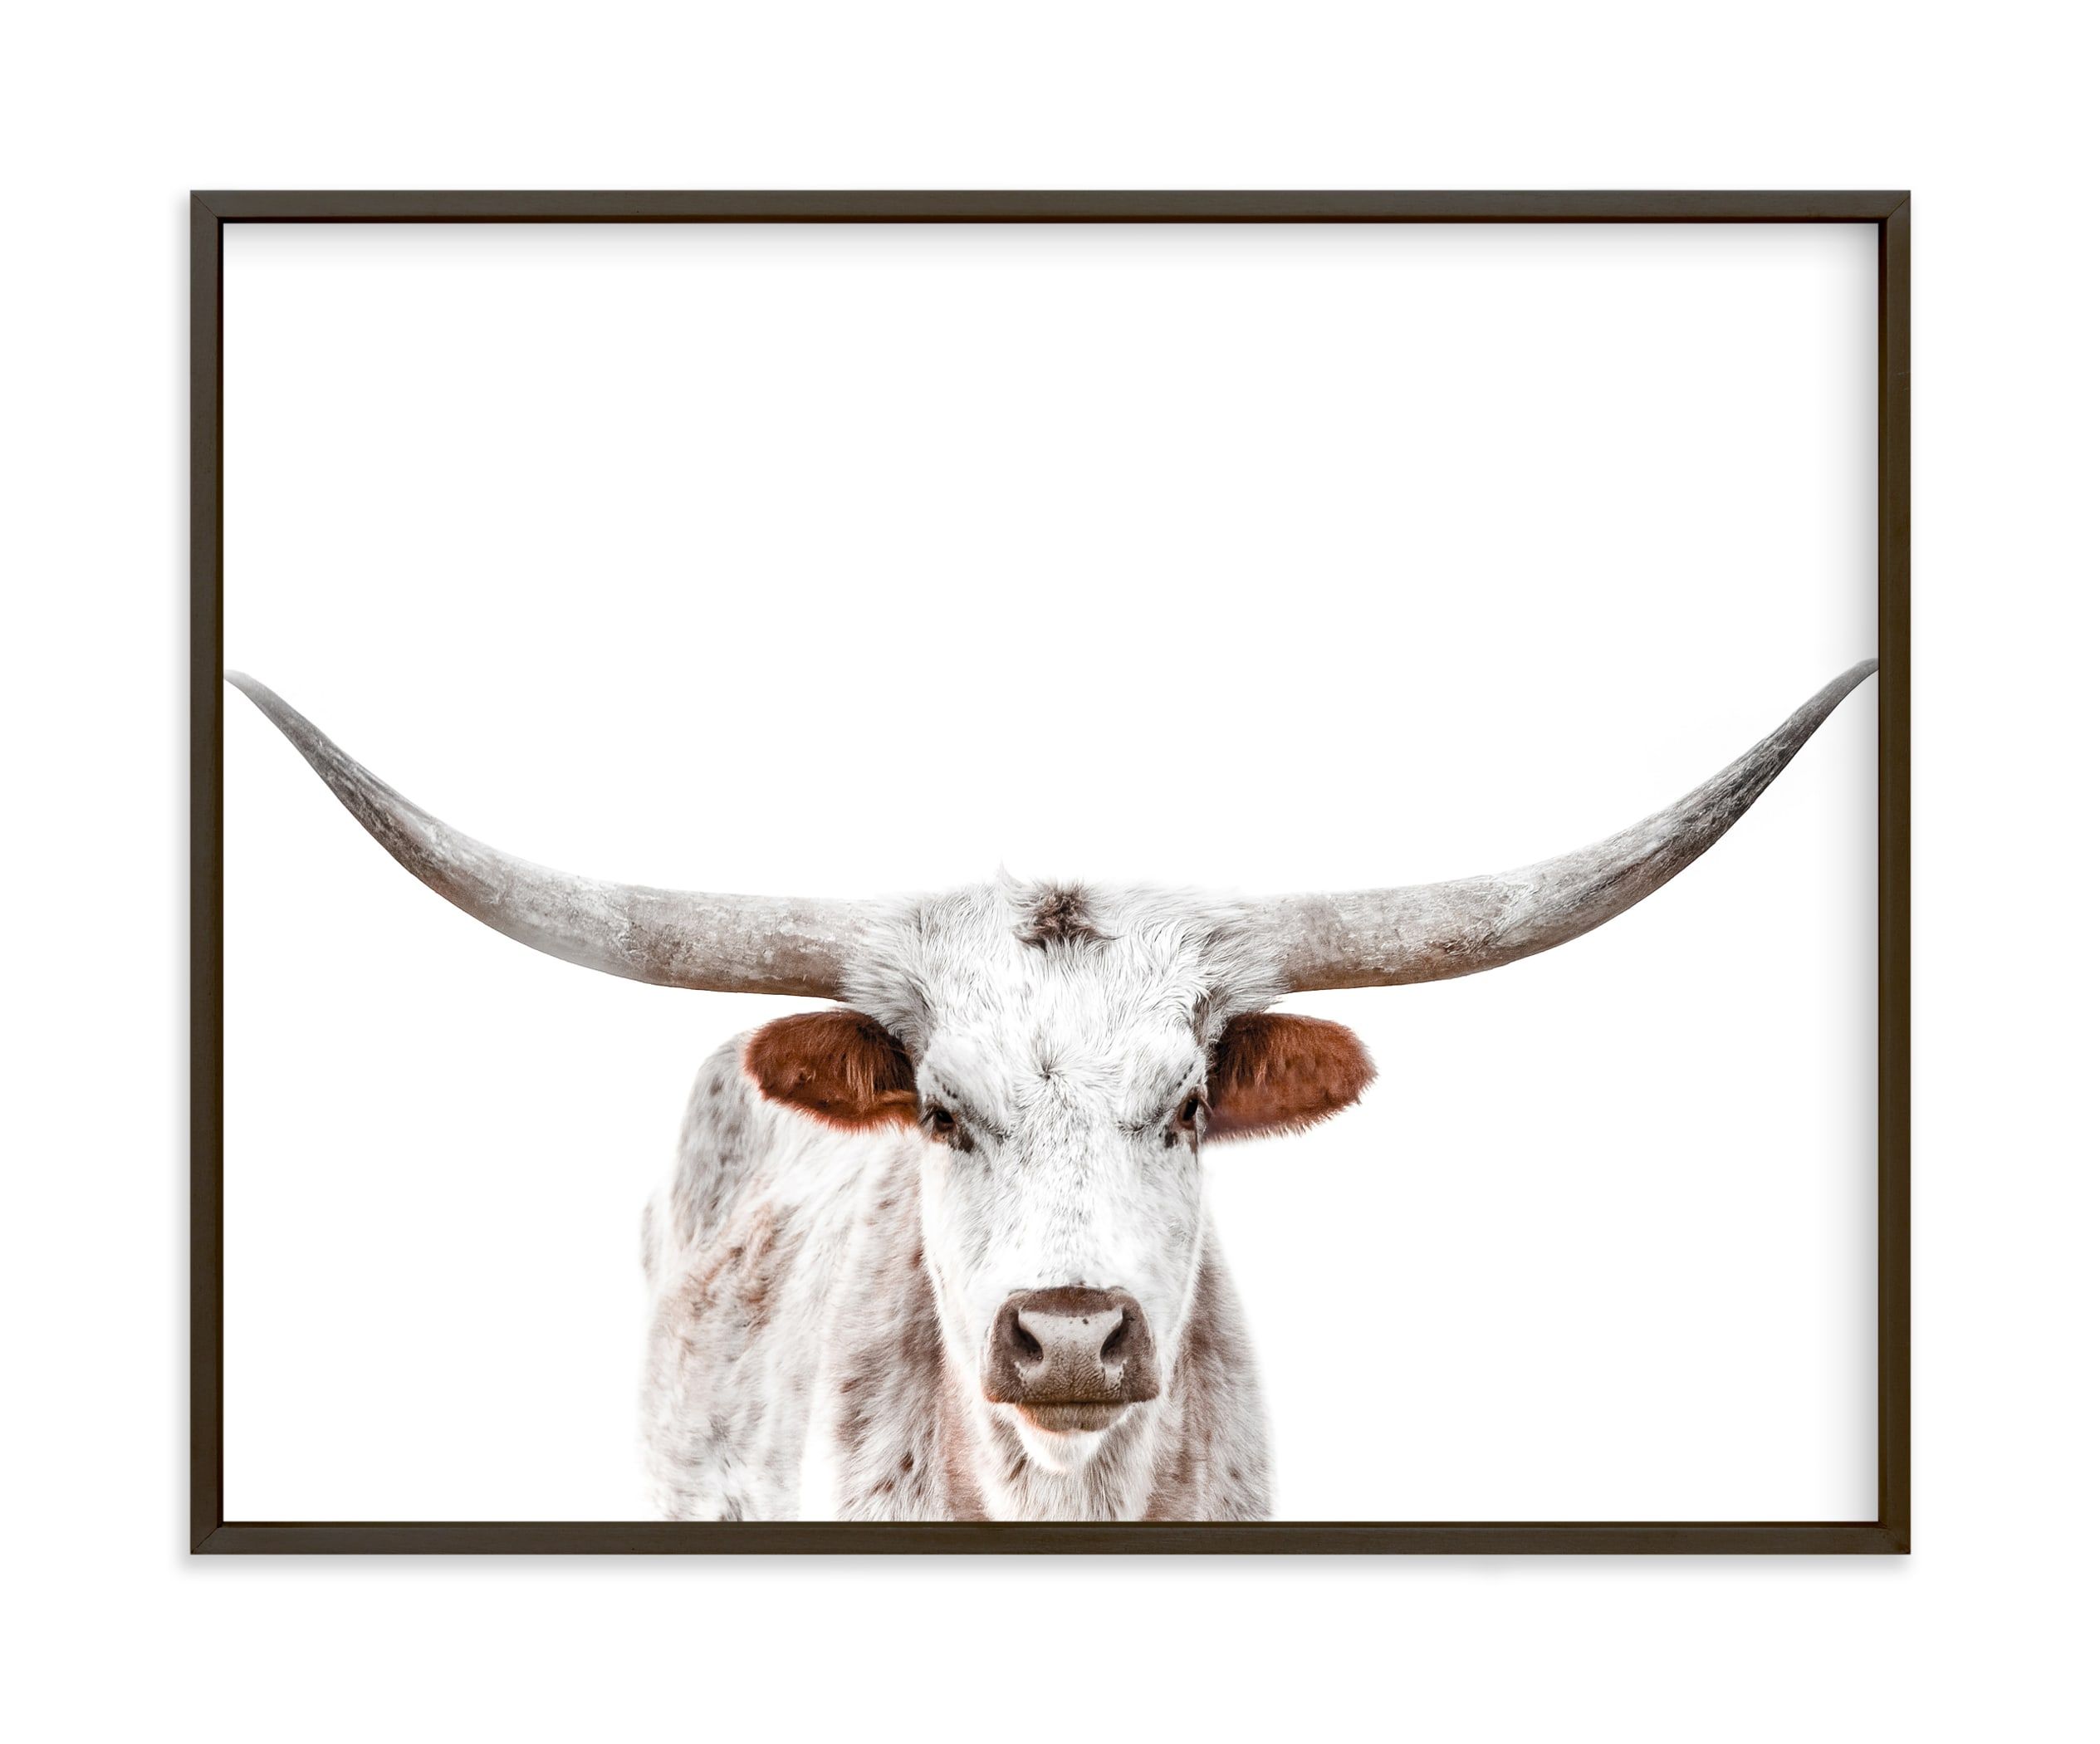 "Sanger" - Photography Limited Edition Art Print by Jani Blake. | Minted